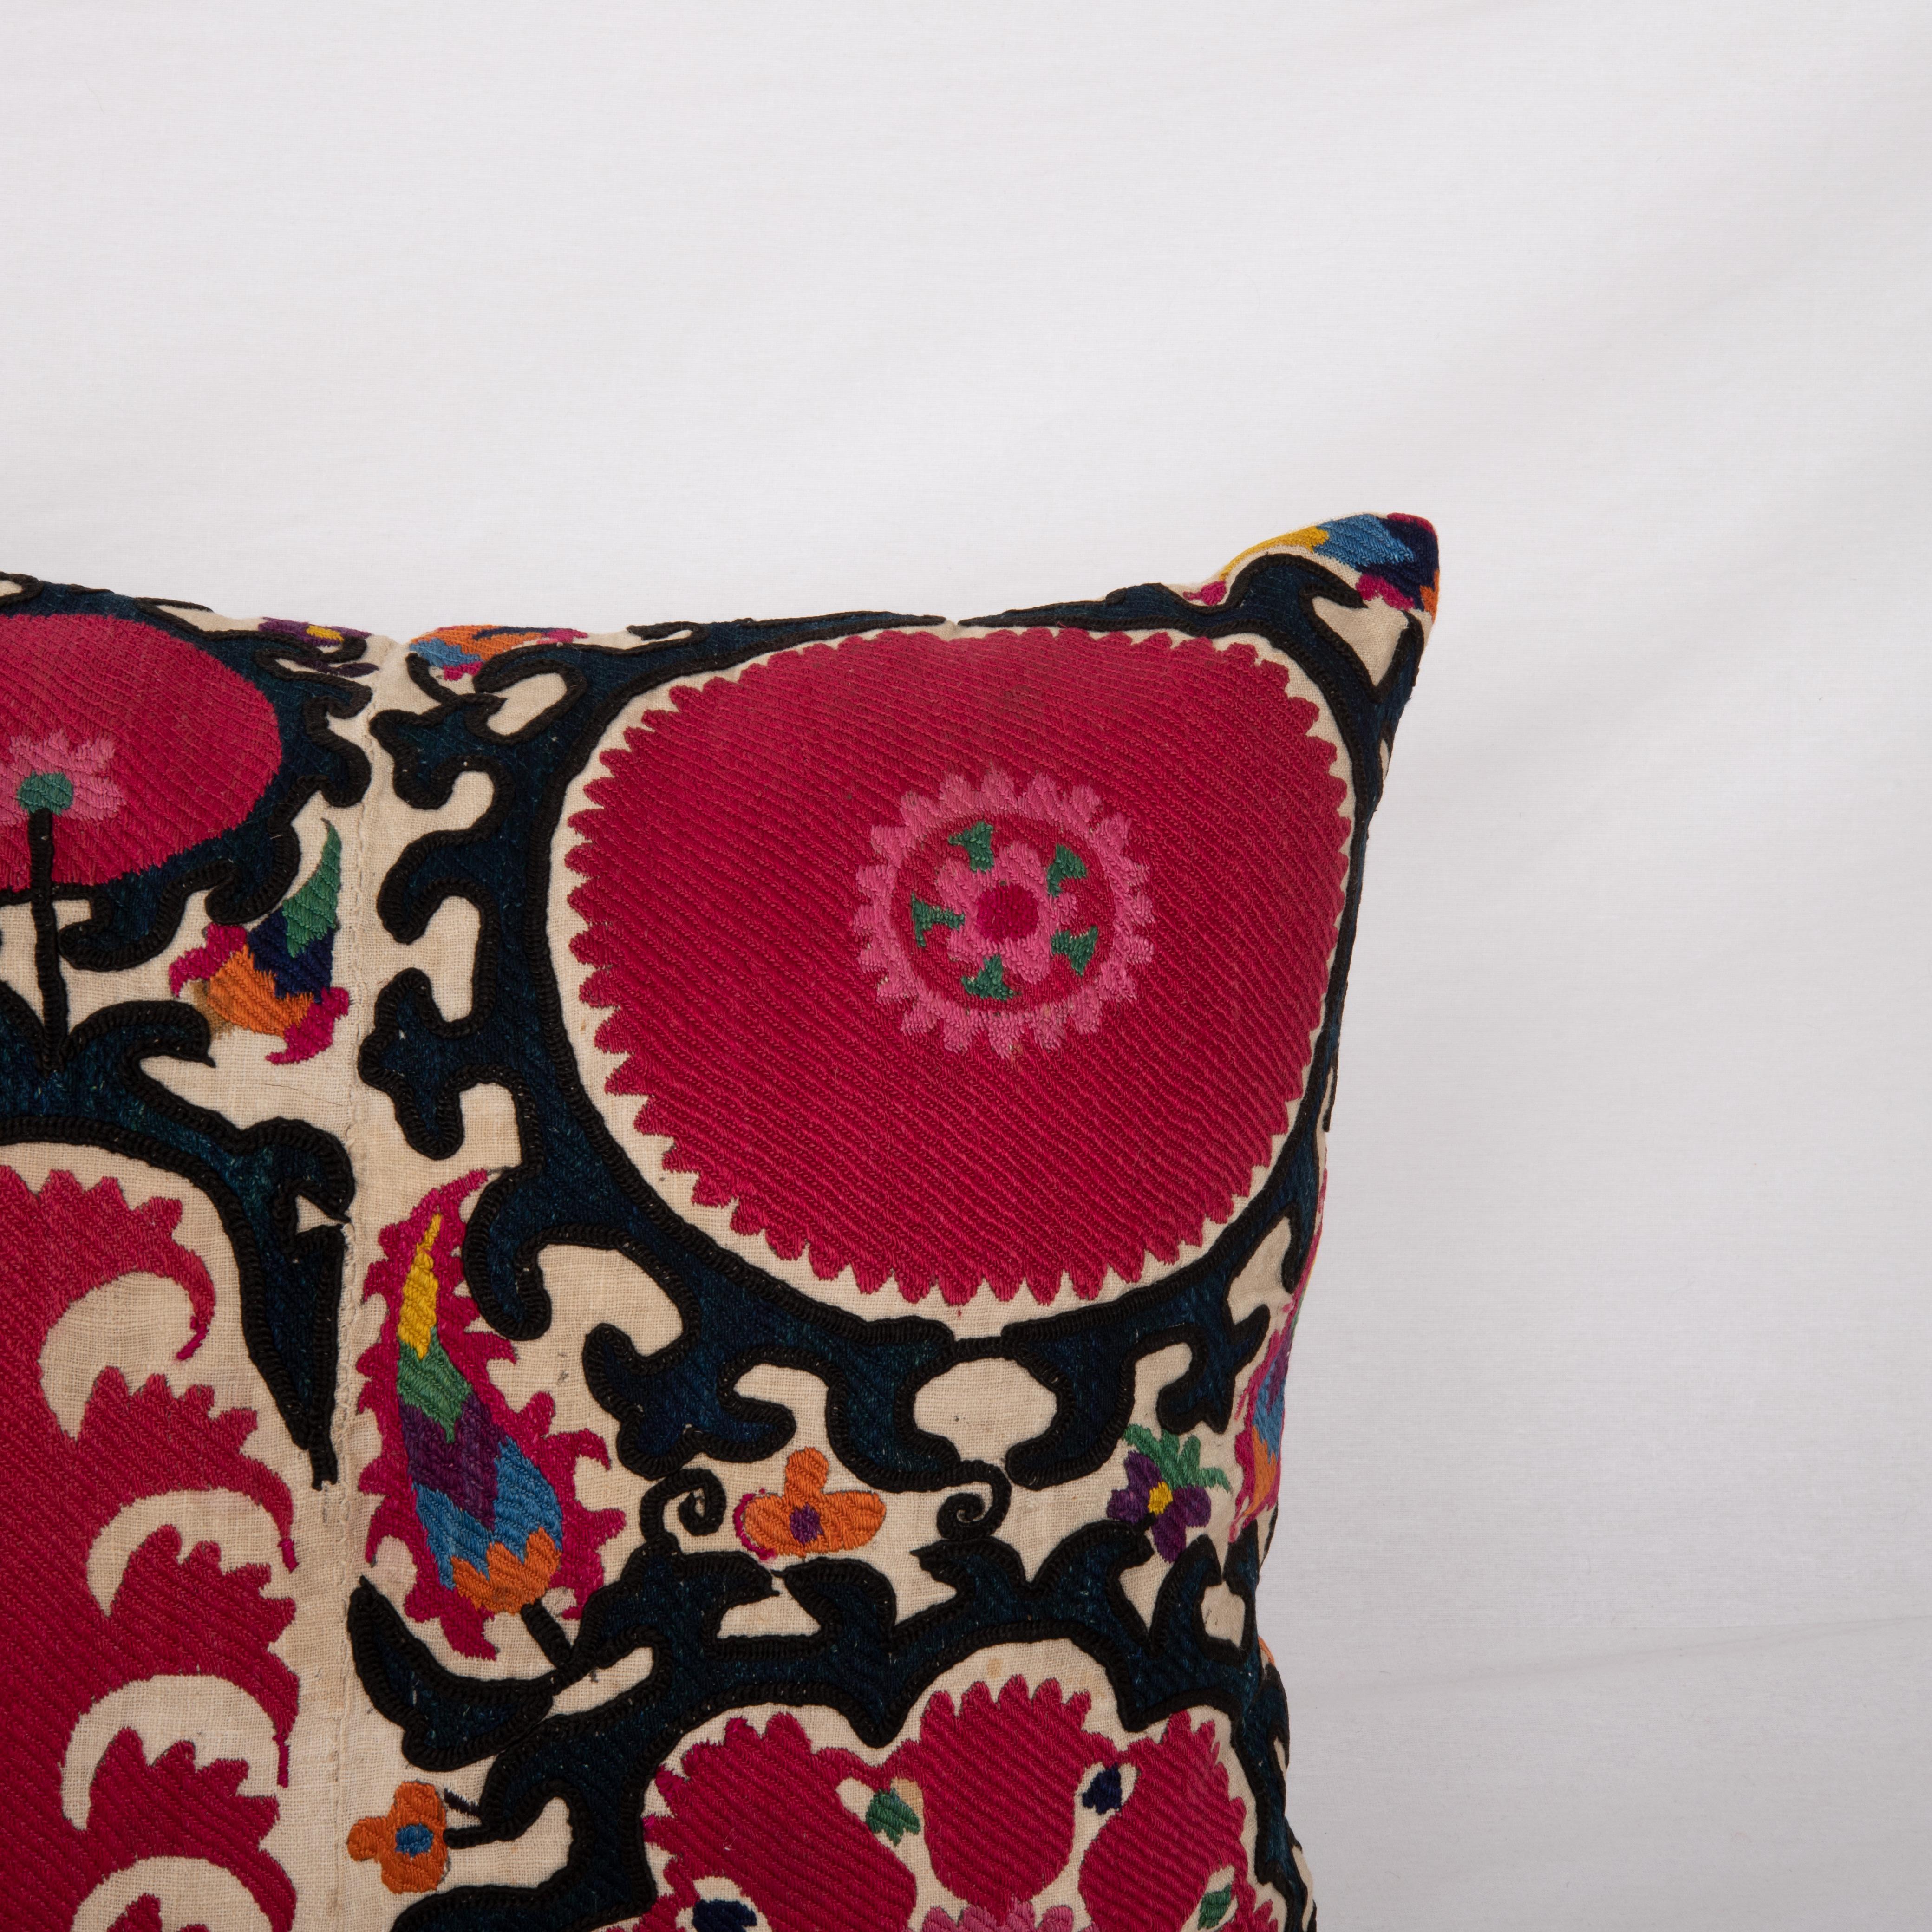 Embroidered Antique Suzani Pillow Cover, Made from a late 19th C. Tajik Suzani For Sale